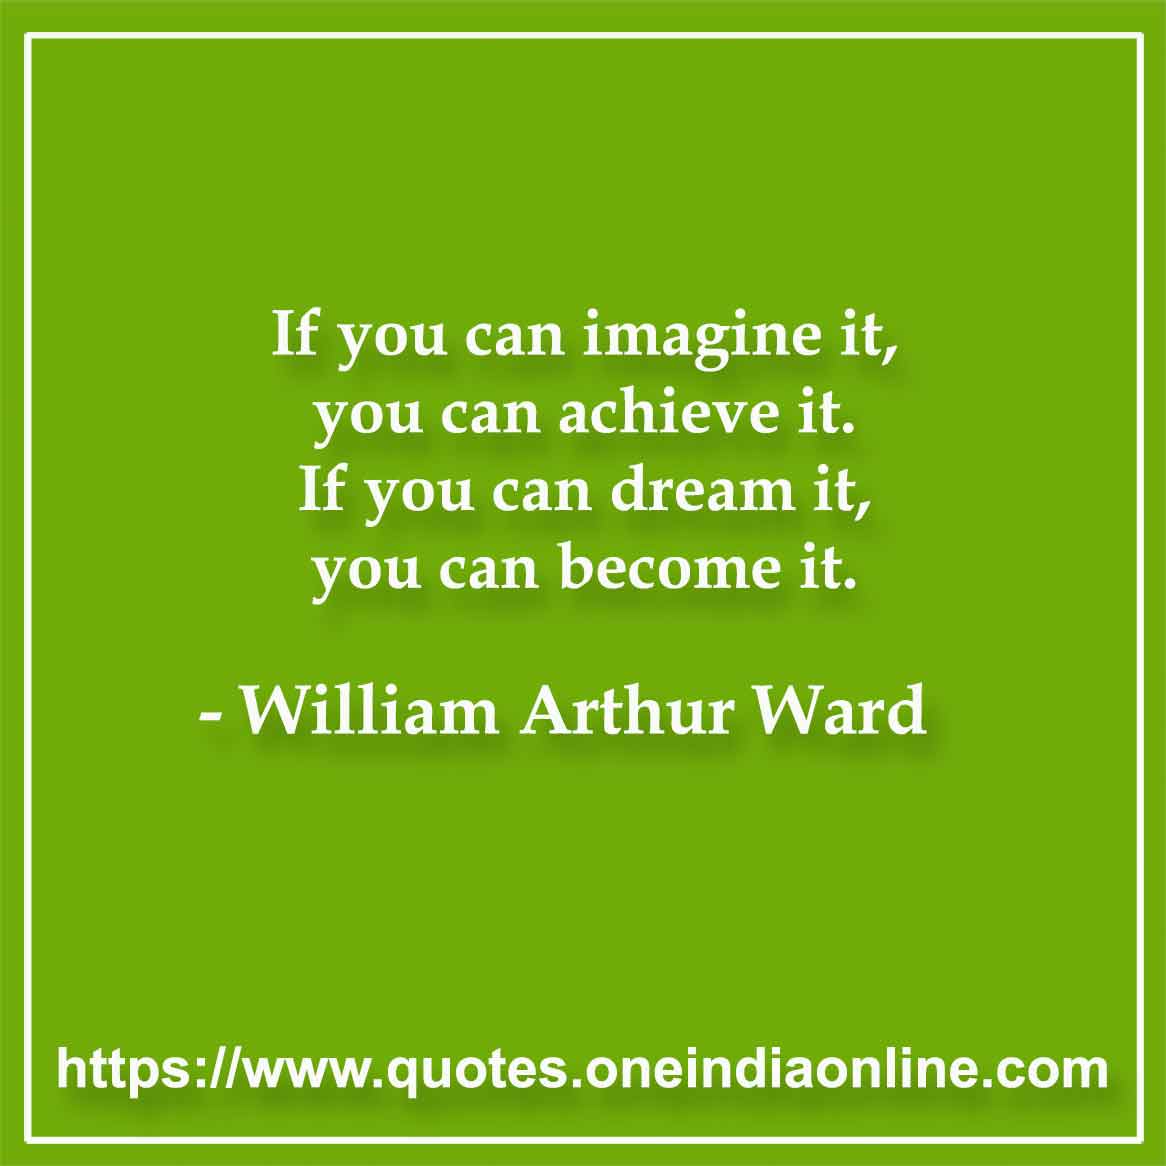 If you can imagine it, you can achieve it. If you can dream it, you can become it.

- William Arthur Ward